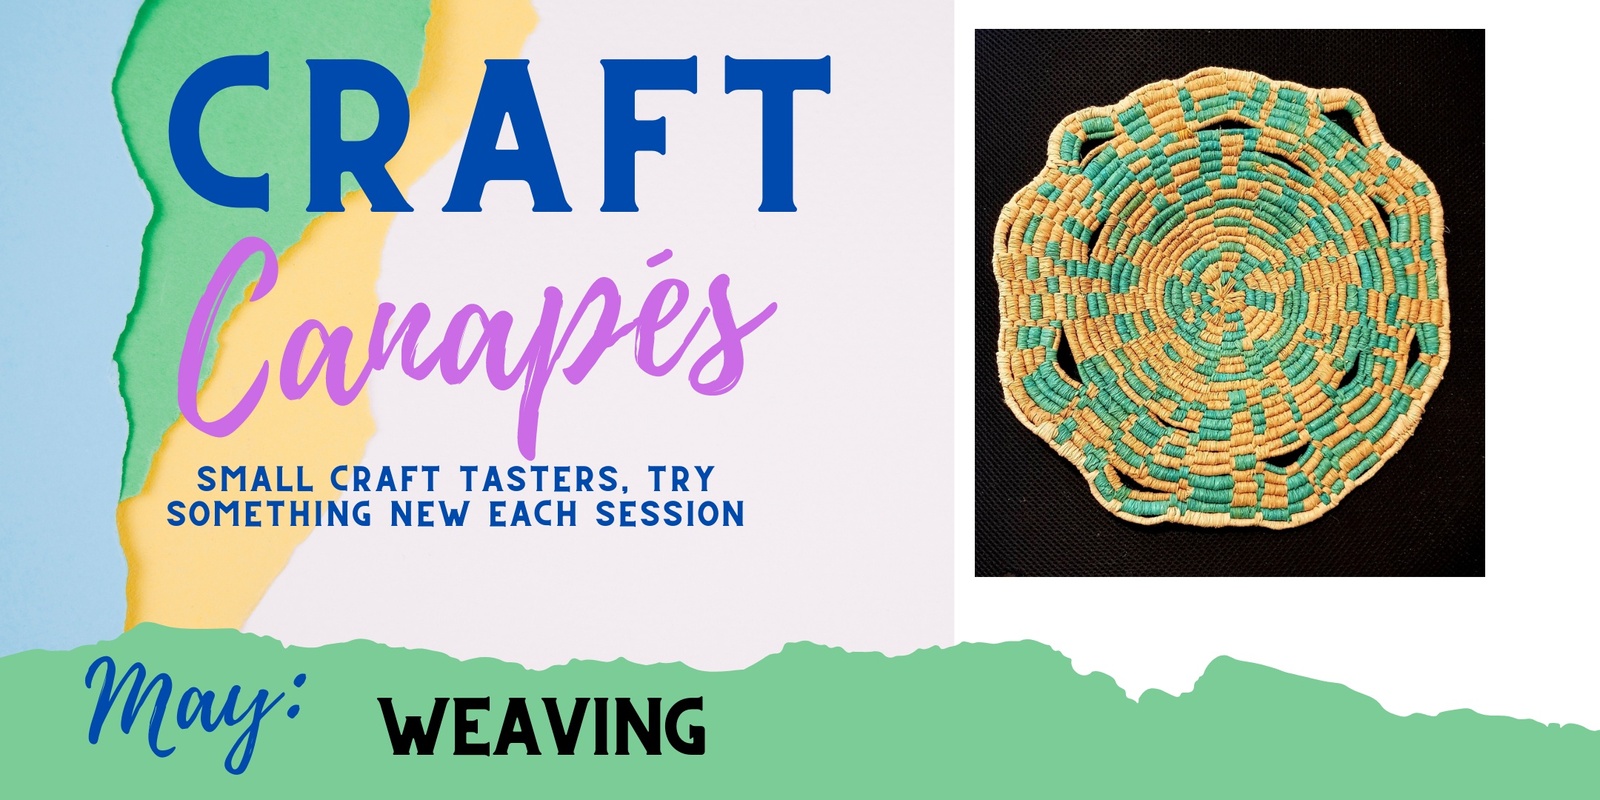 Banner image for Craft Canapés - Weaving